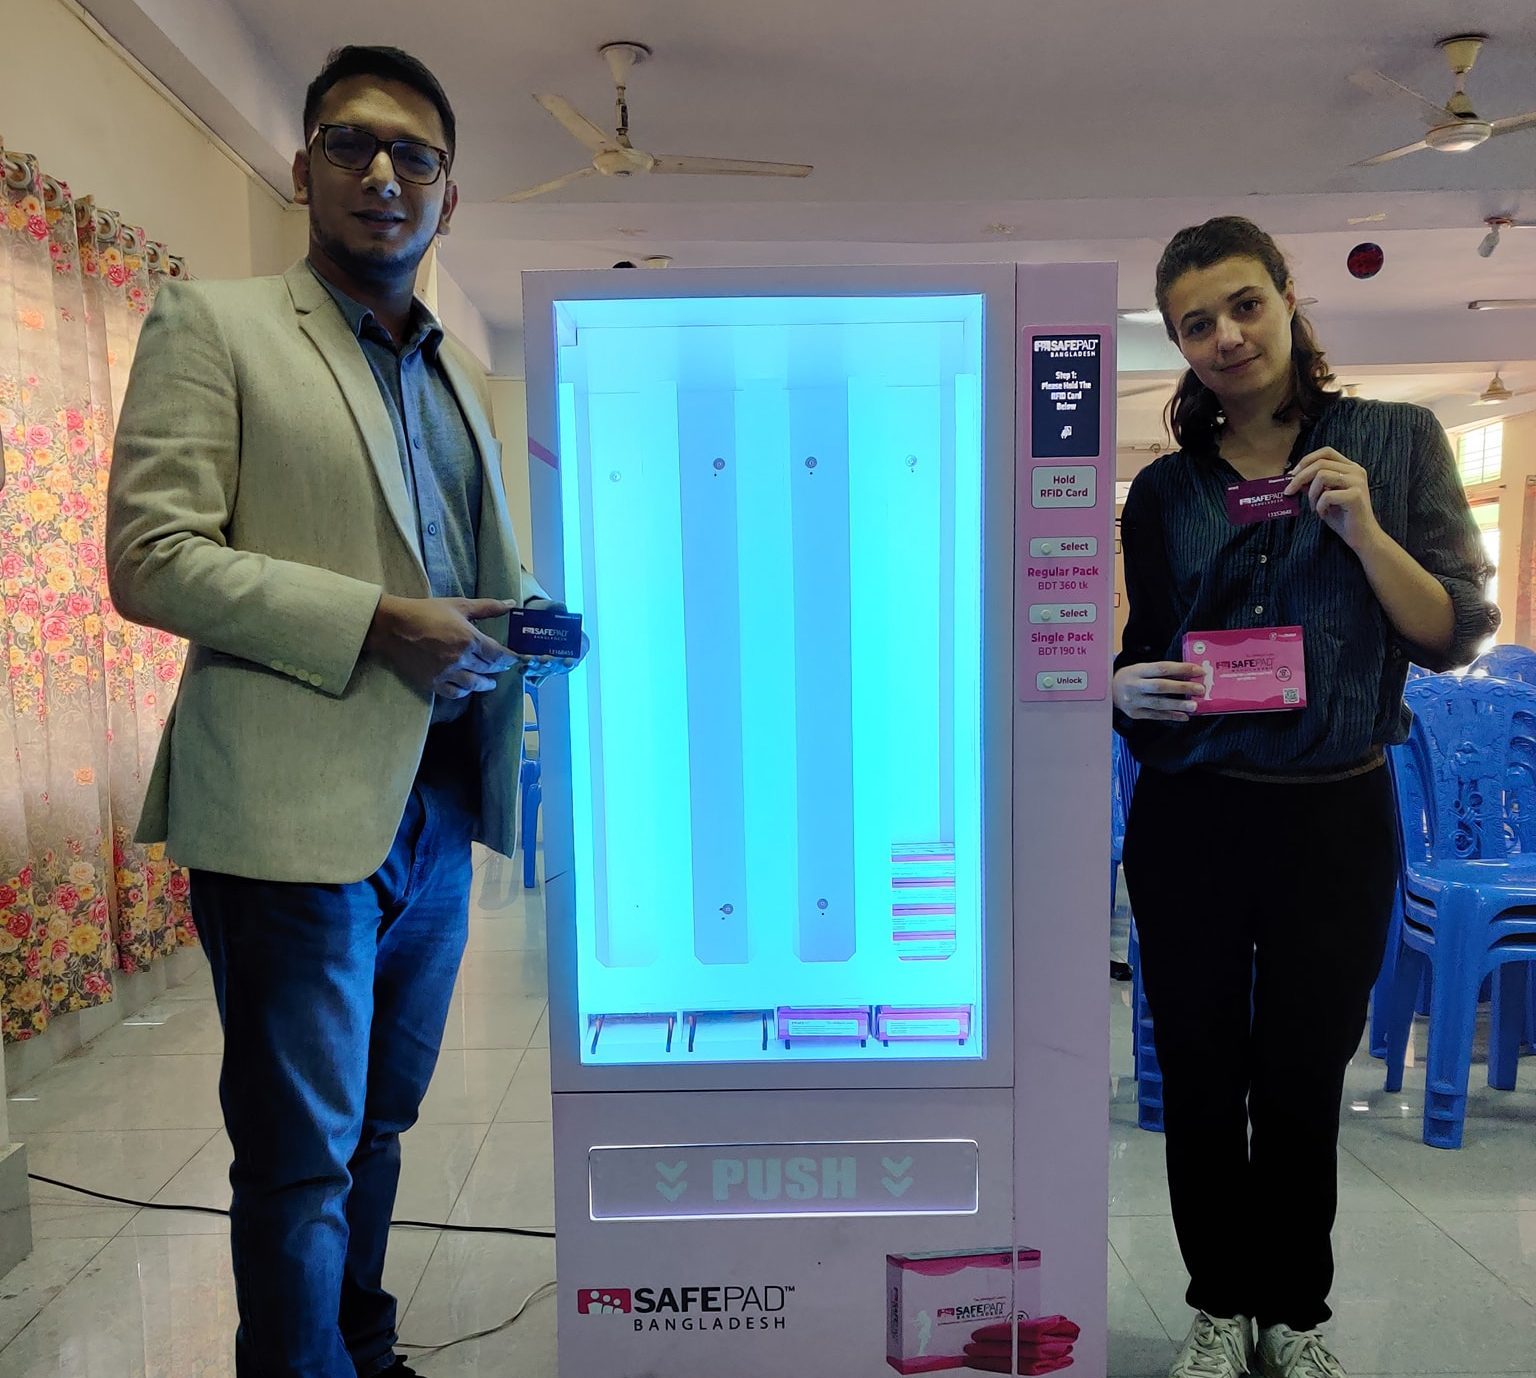 Safepad Bangladesh CEO Tahmid Kamal Chowdhury and Ms. Jeanne Charbit from HYSTRA based in Paris, France posing with Safepad Vending Machine, a specially customized version designed and developed by the Diva - Sanitary Pad Vending Machine team. A Proudly Made In Bangladesh product.